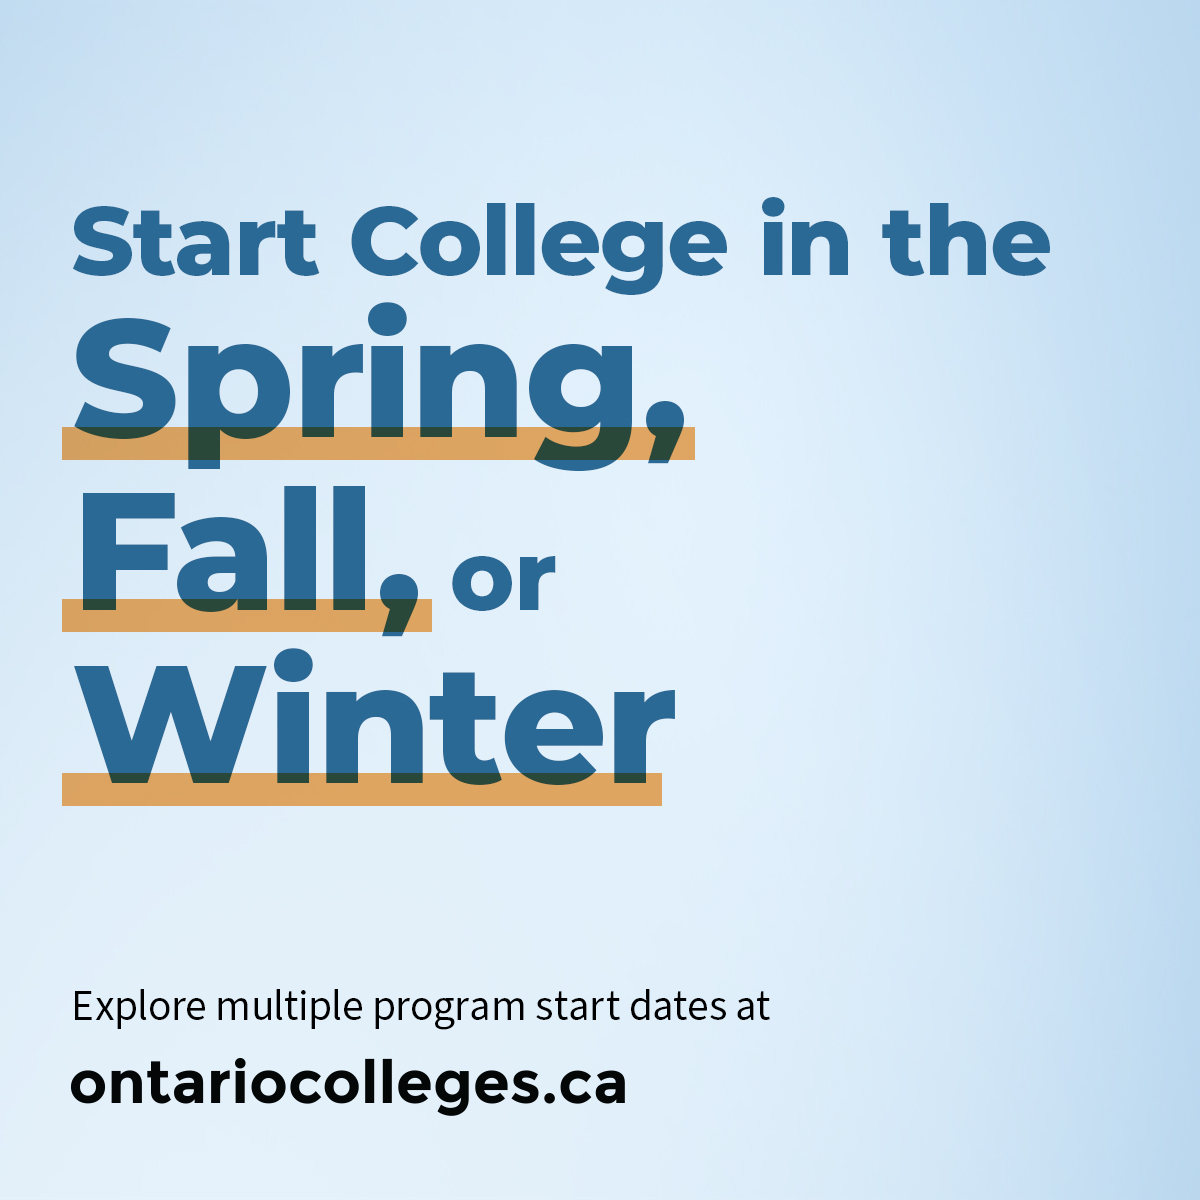 Colleges offer program start dates in fall, spring, and winter, so you can pick the start date that suits YOU. Visit our site to explore programs and flexible start date options, then apply at ontariocolleges.ca. #FlexibleStart #HigherEducation #CollegeLife #OntarioColleges